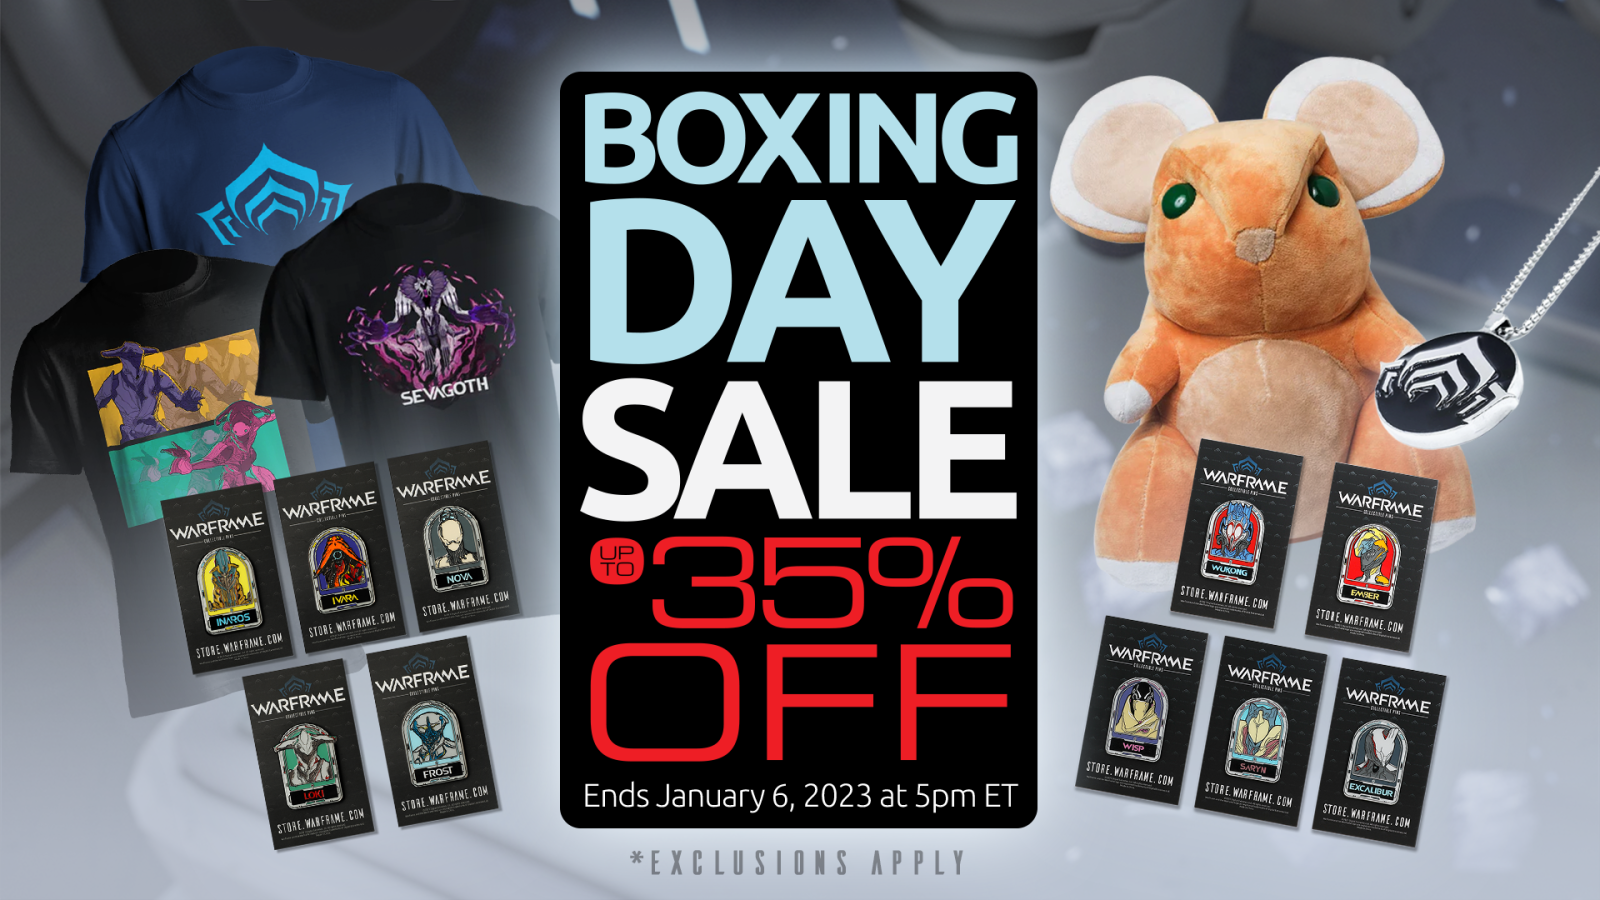 Boxing Day Sale 2022